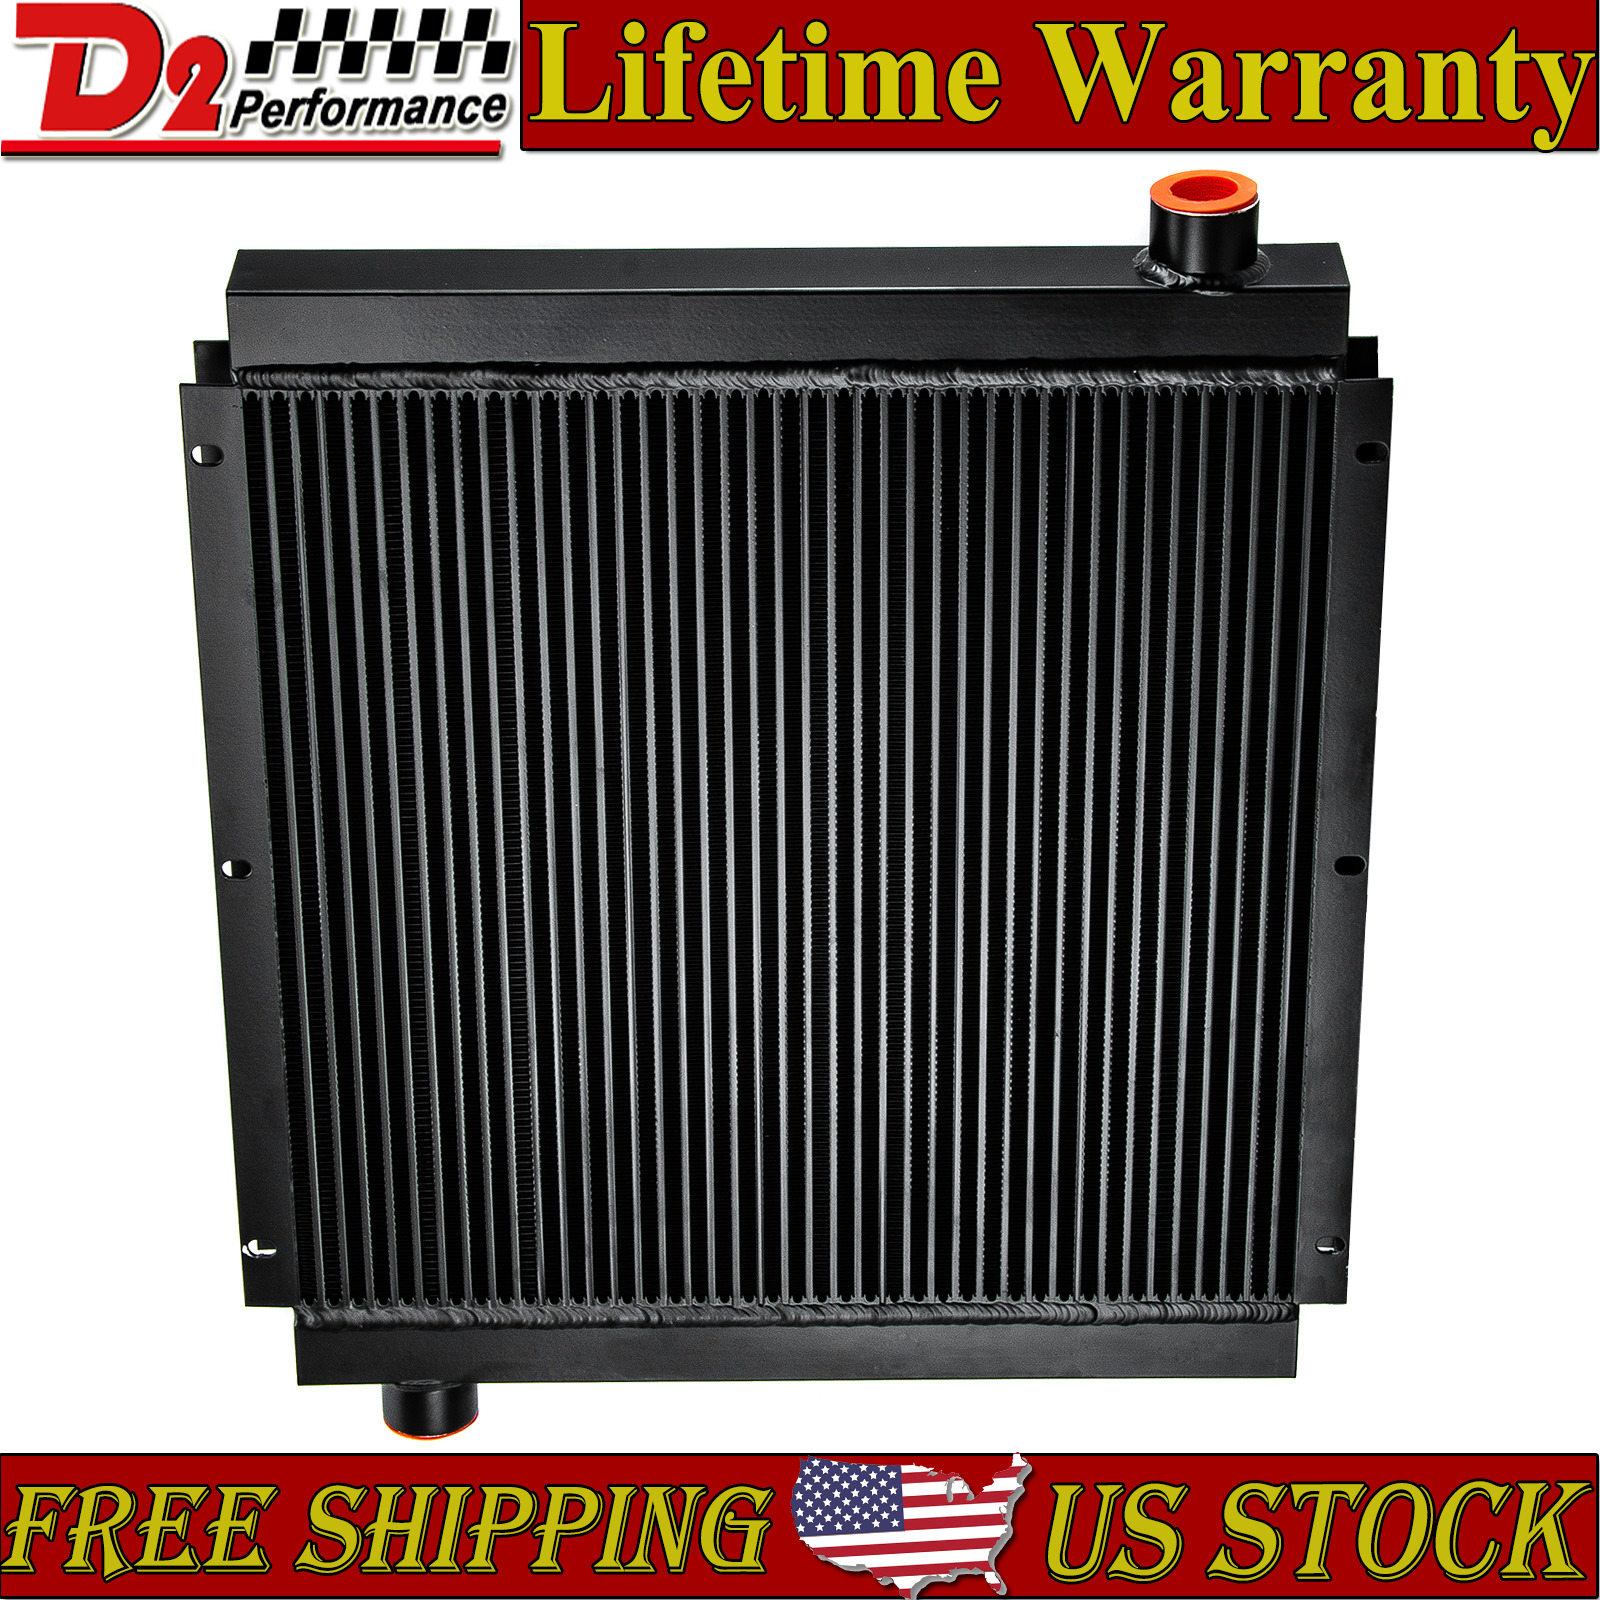 Hydraulic Oil Cooler 0-120 GPM 90HP For Industrial Cooling System Black